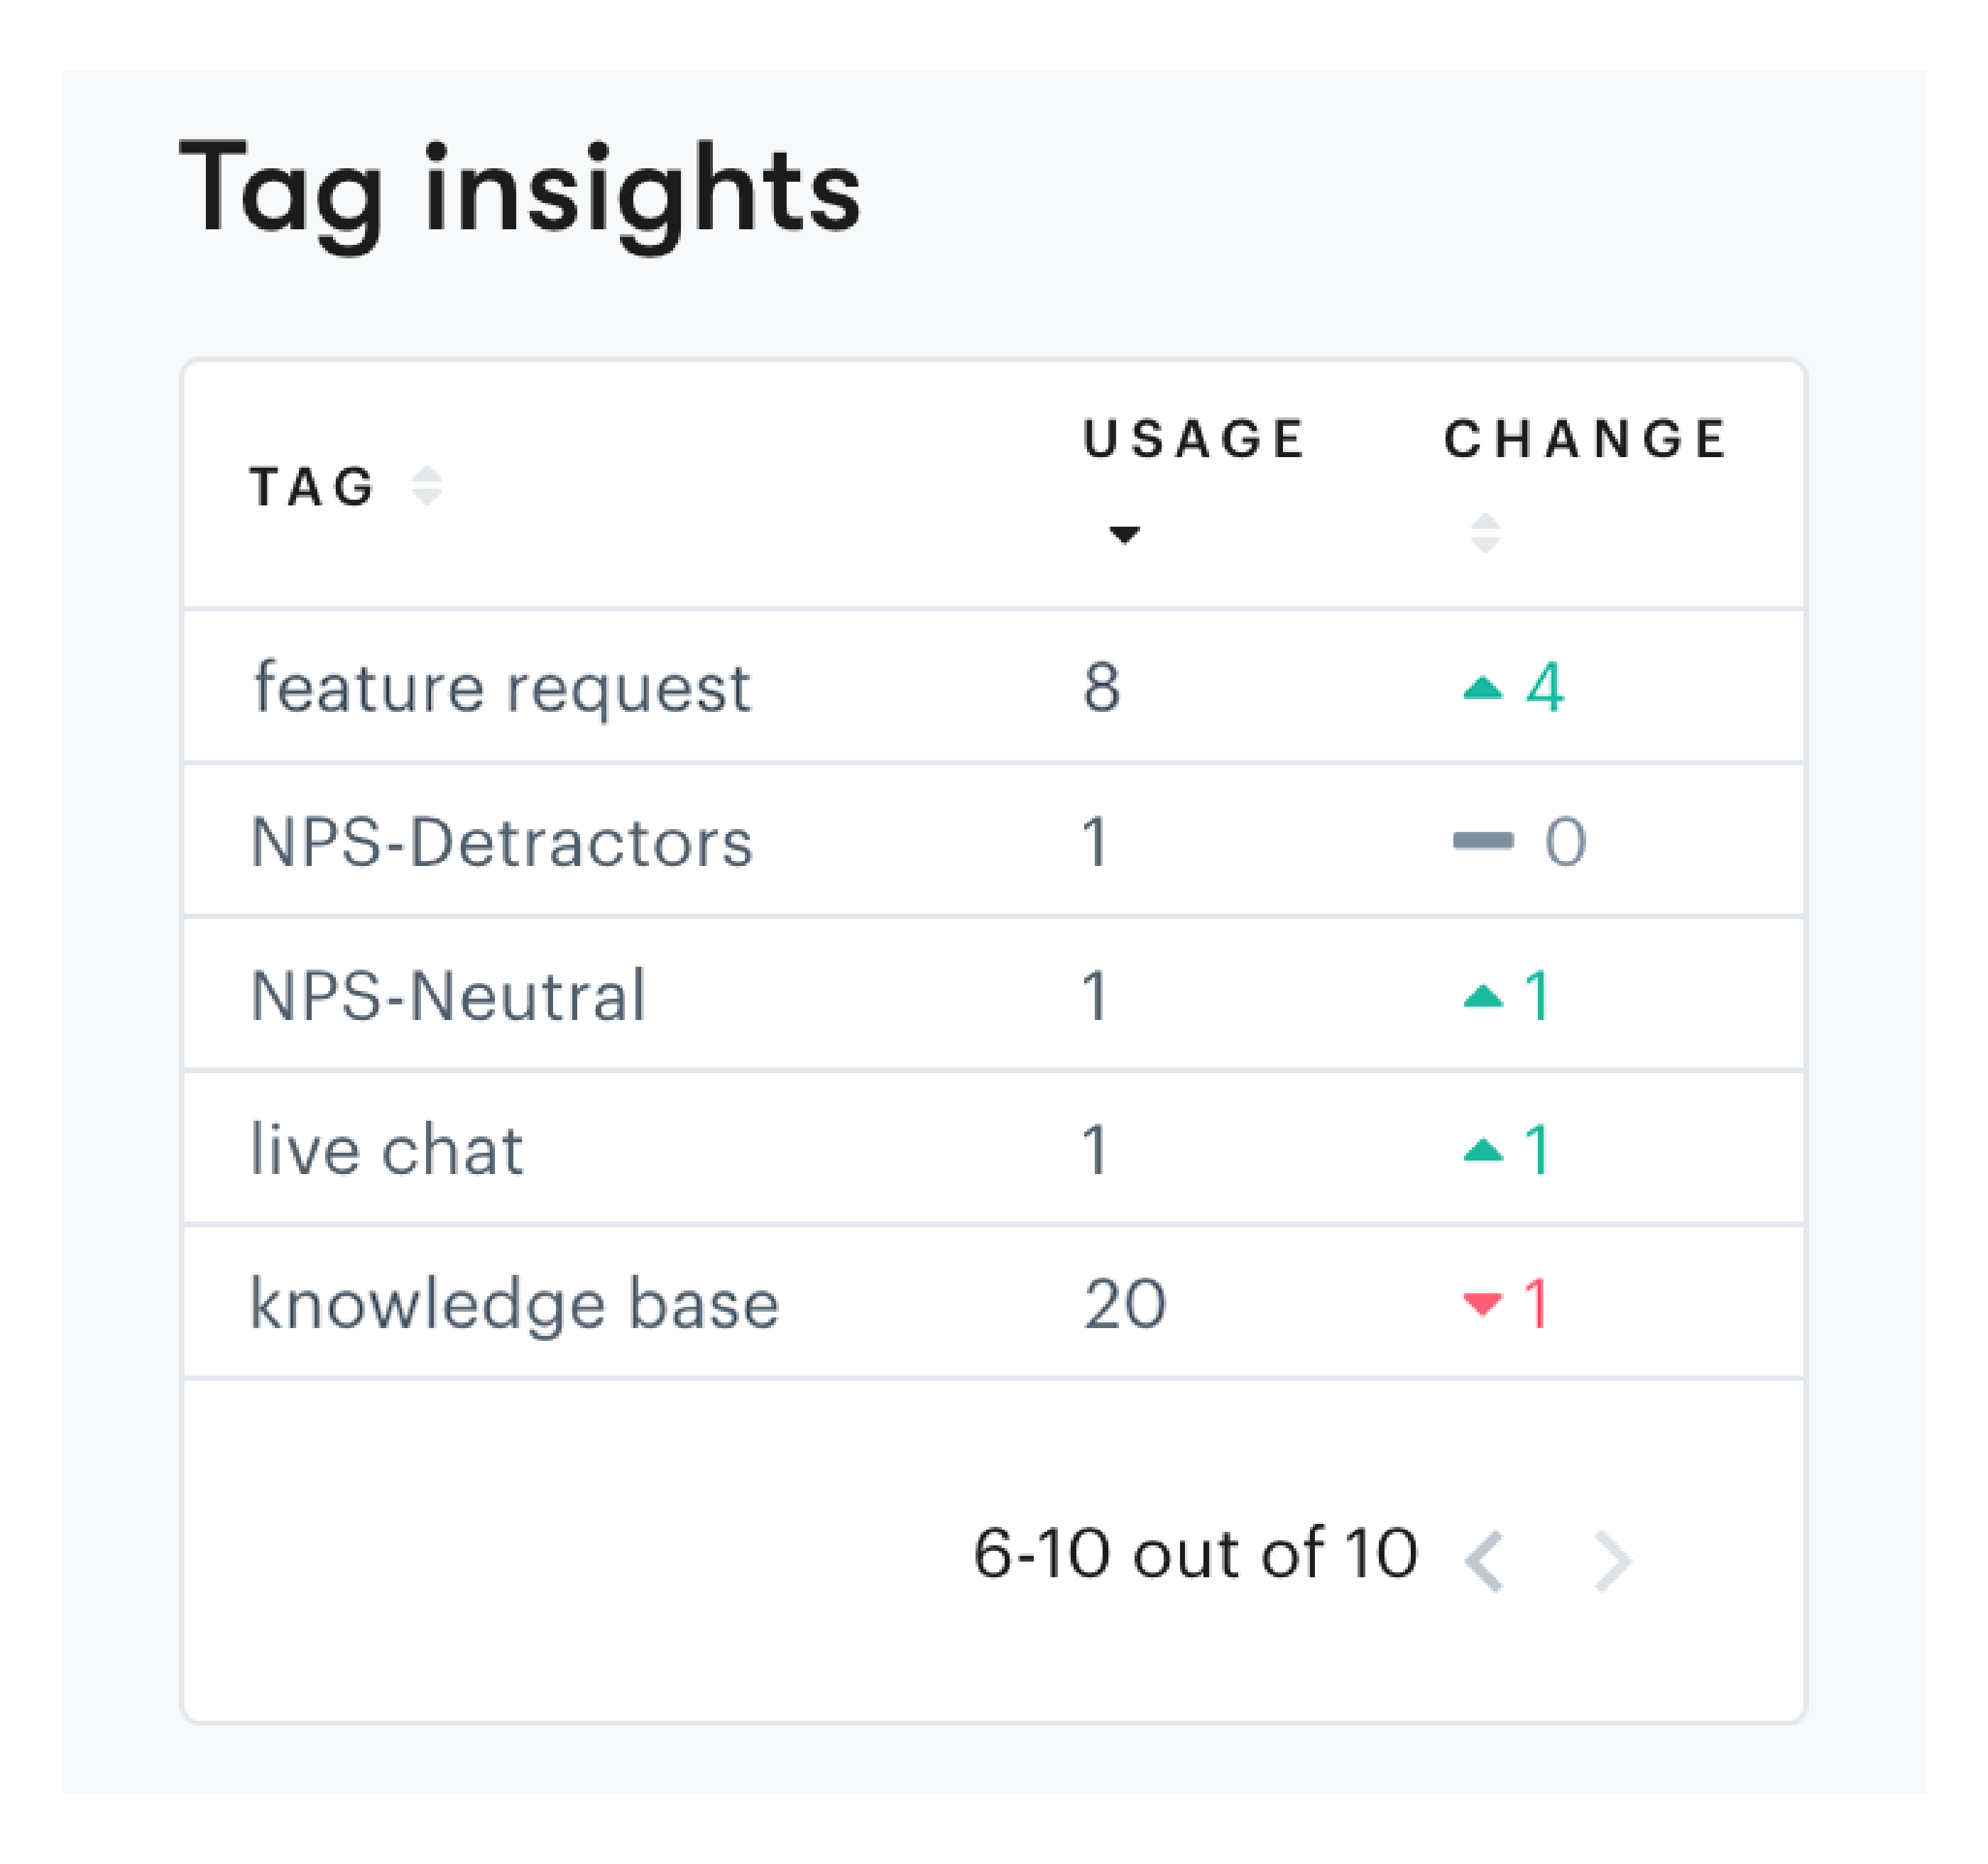 tag insight report within our Customer Service Platform